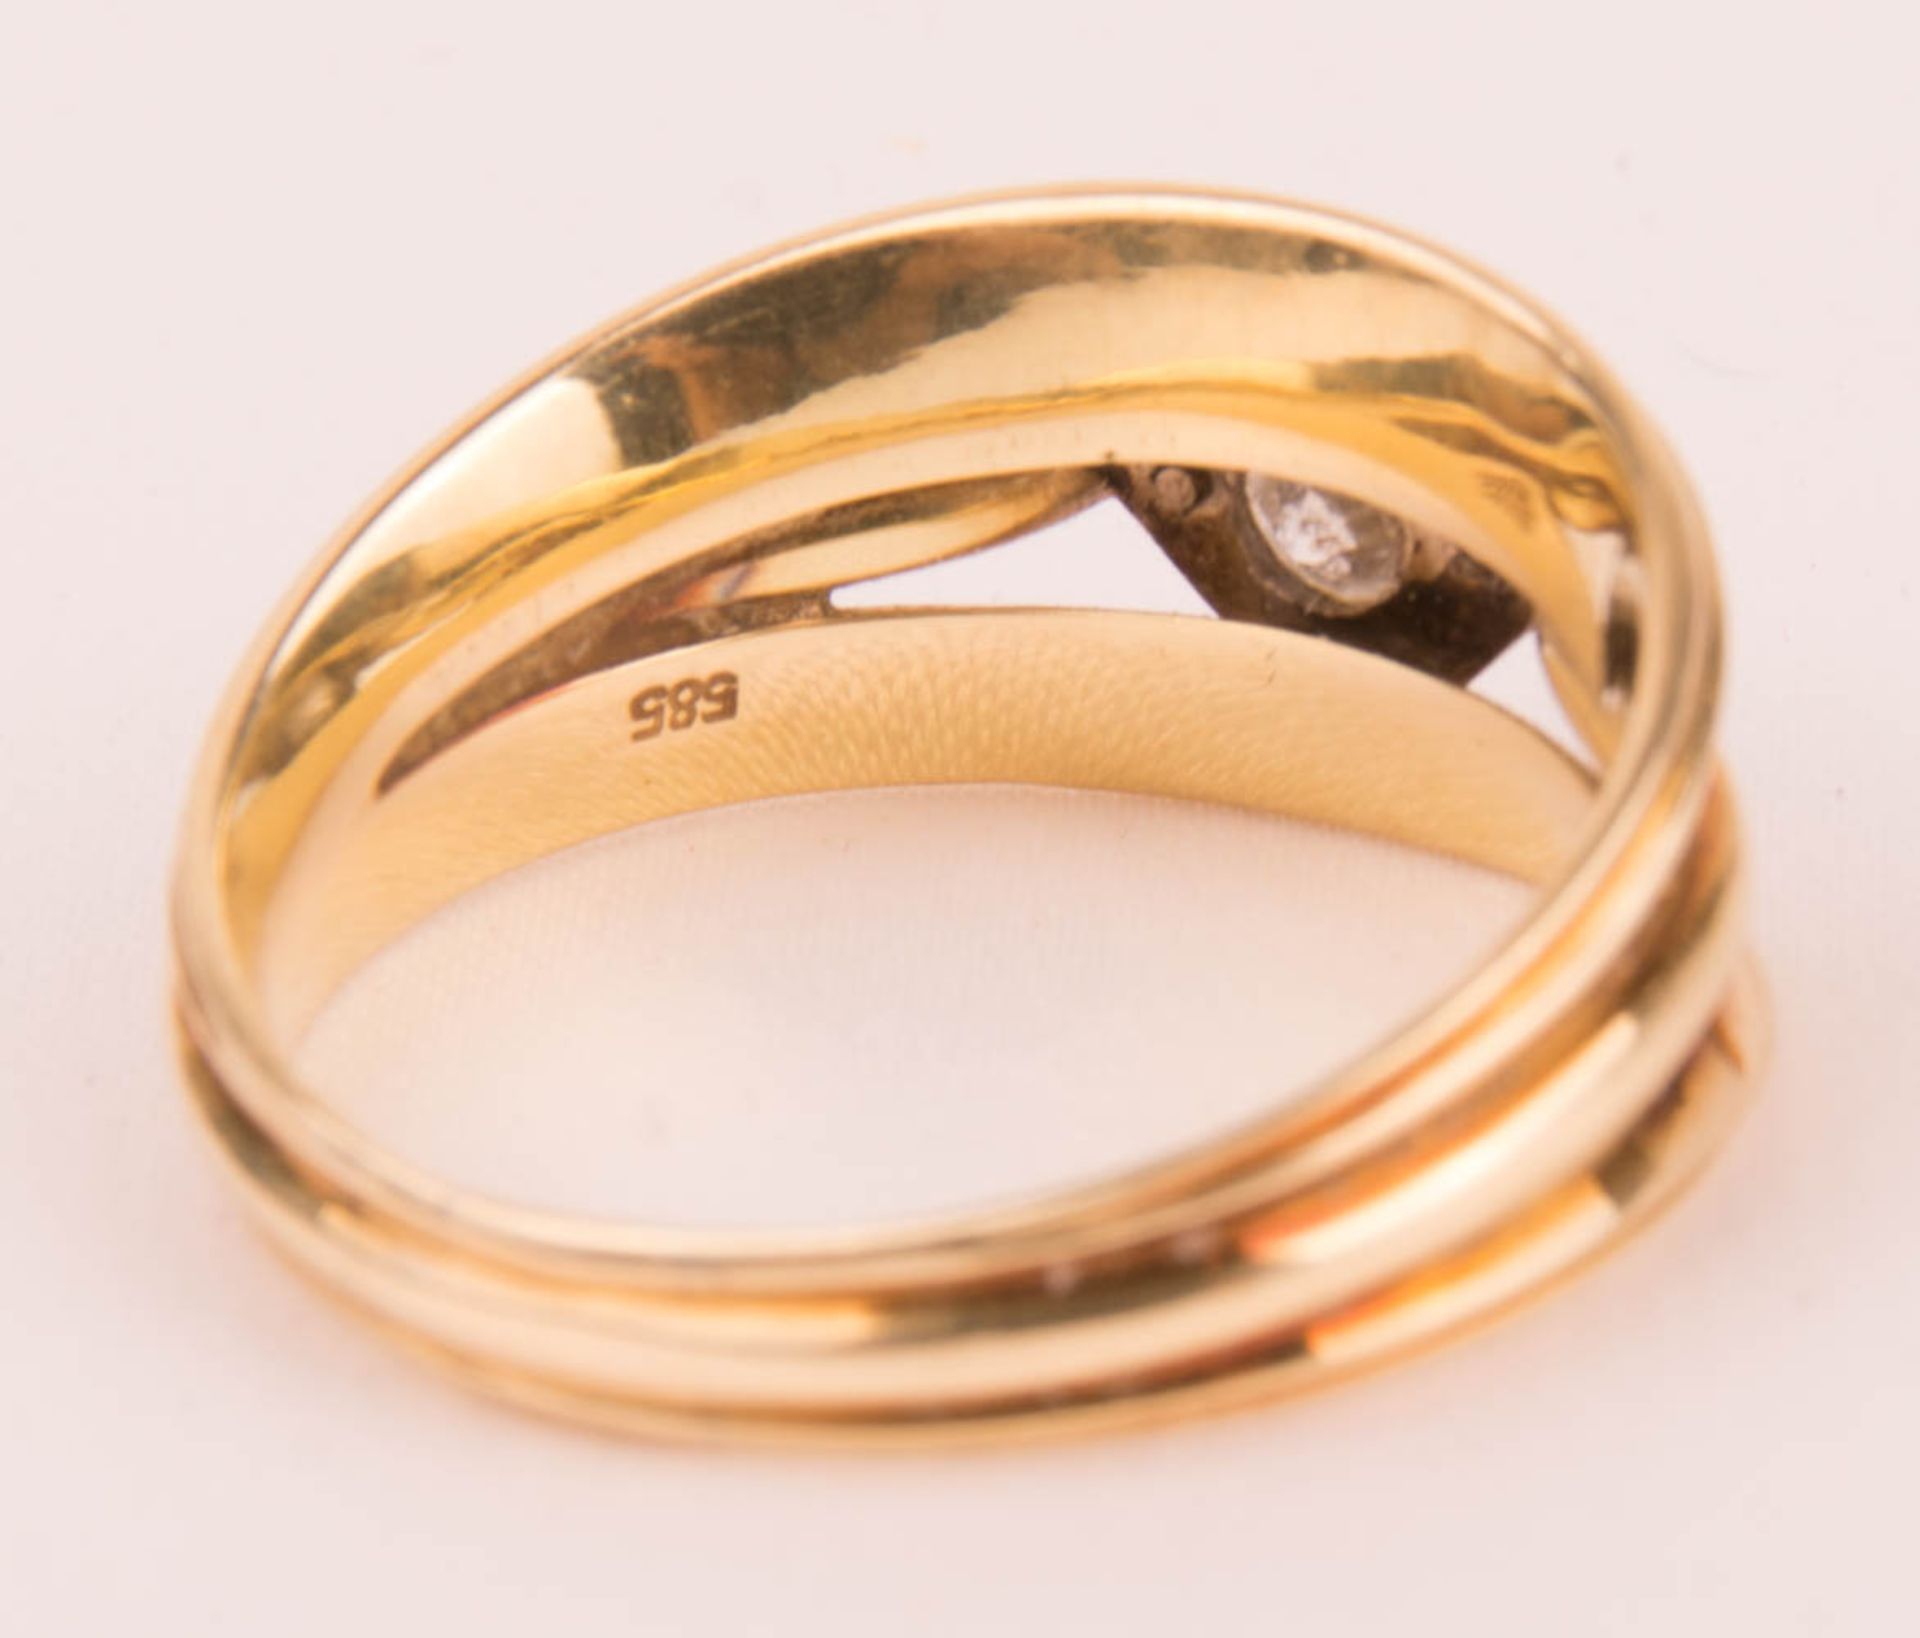 Wide ring with diamond, 585 white/yellow gold. - Image 4 of 4